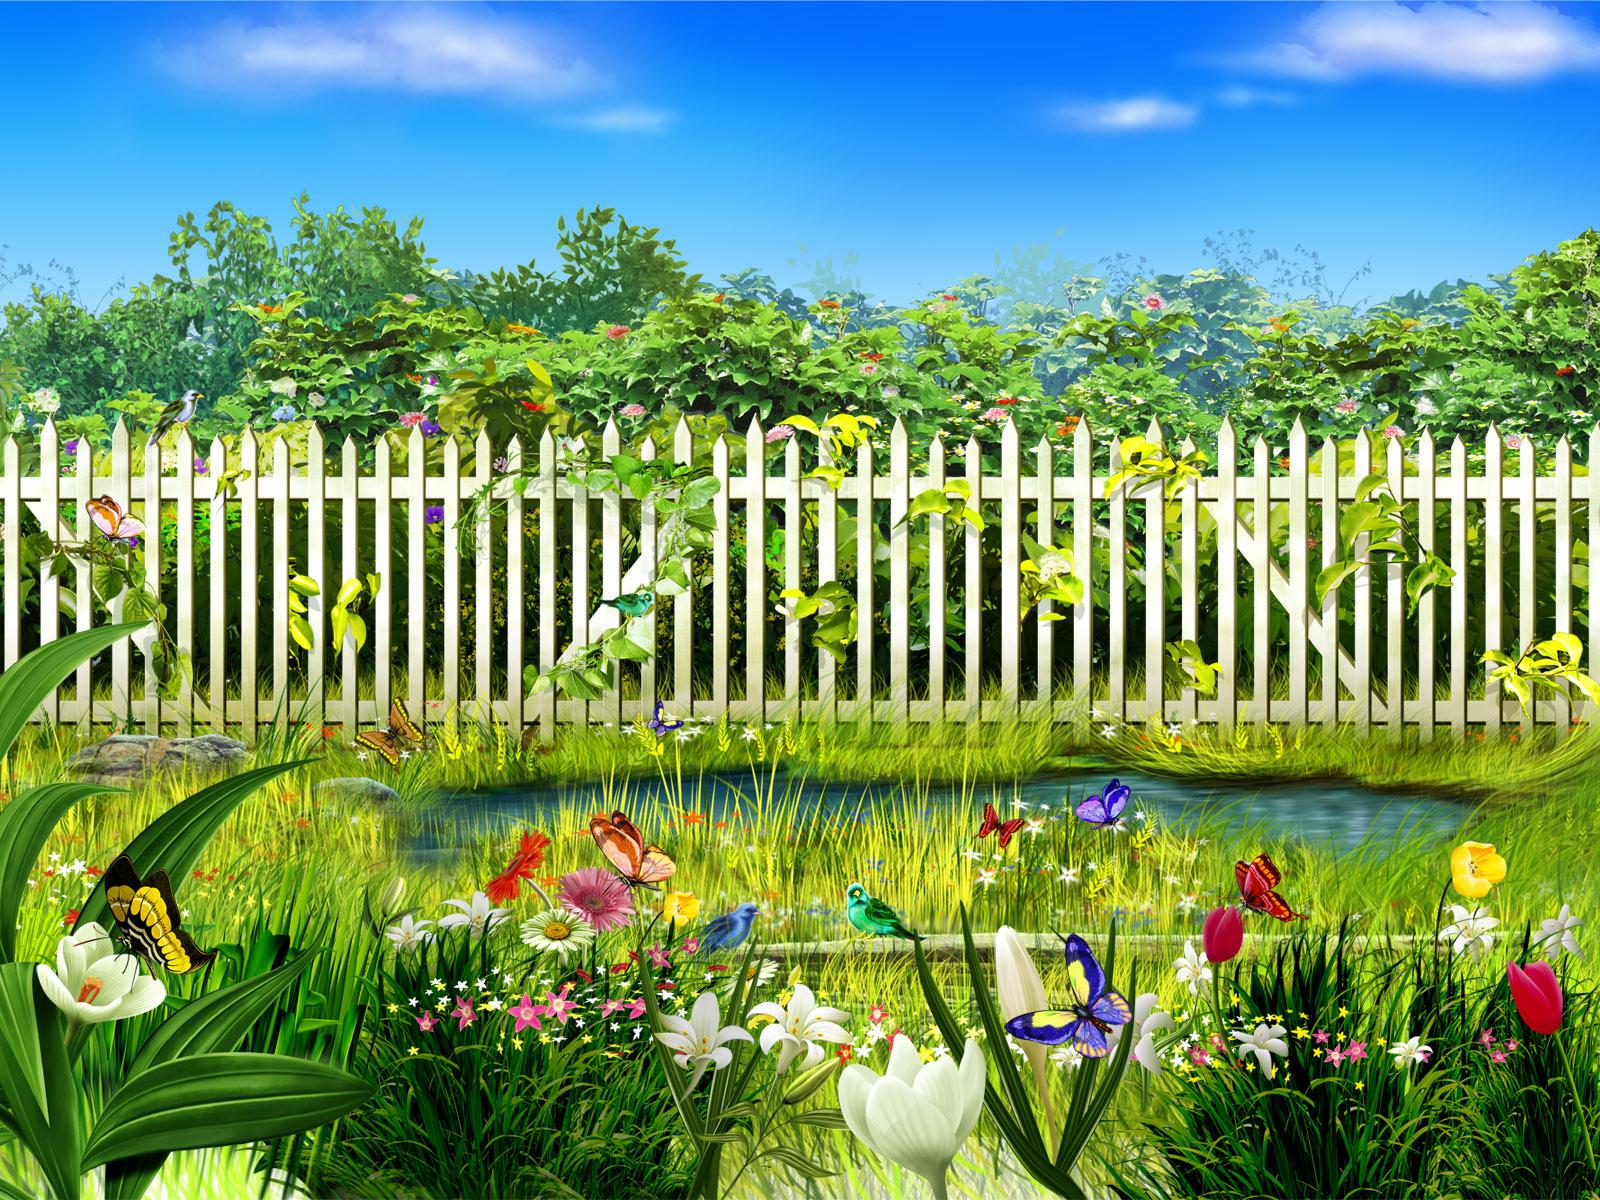 Blooming Garden wallpaper and image, picture, photo